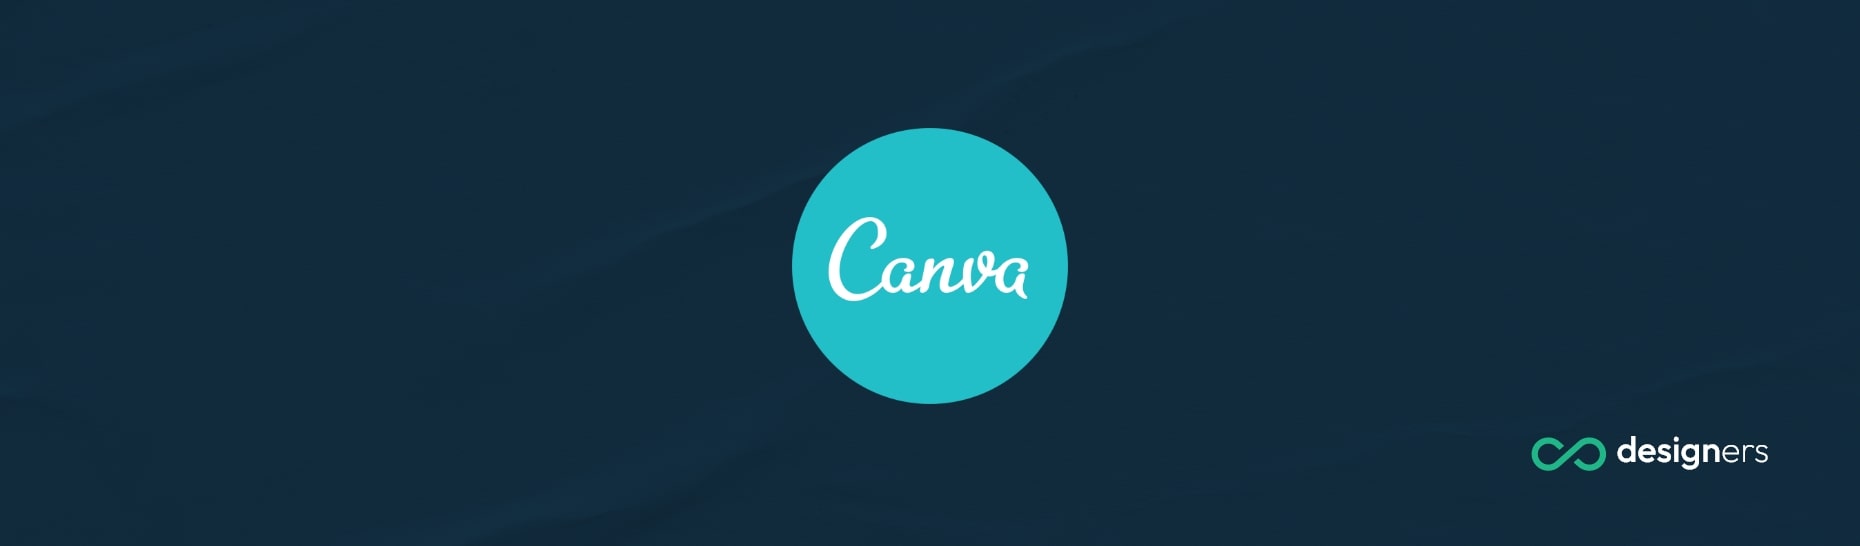 Does Canva Have Customer Support?